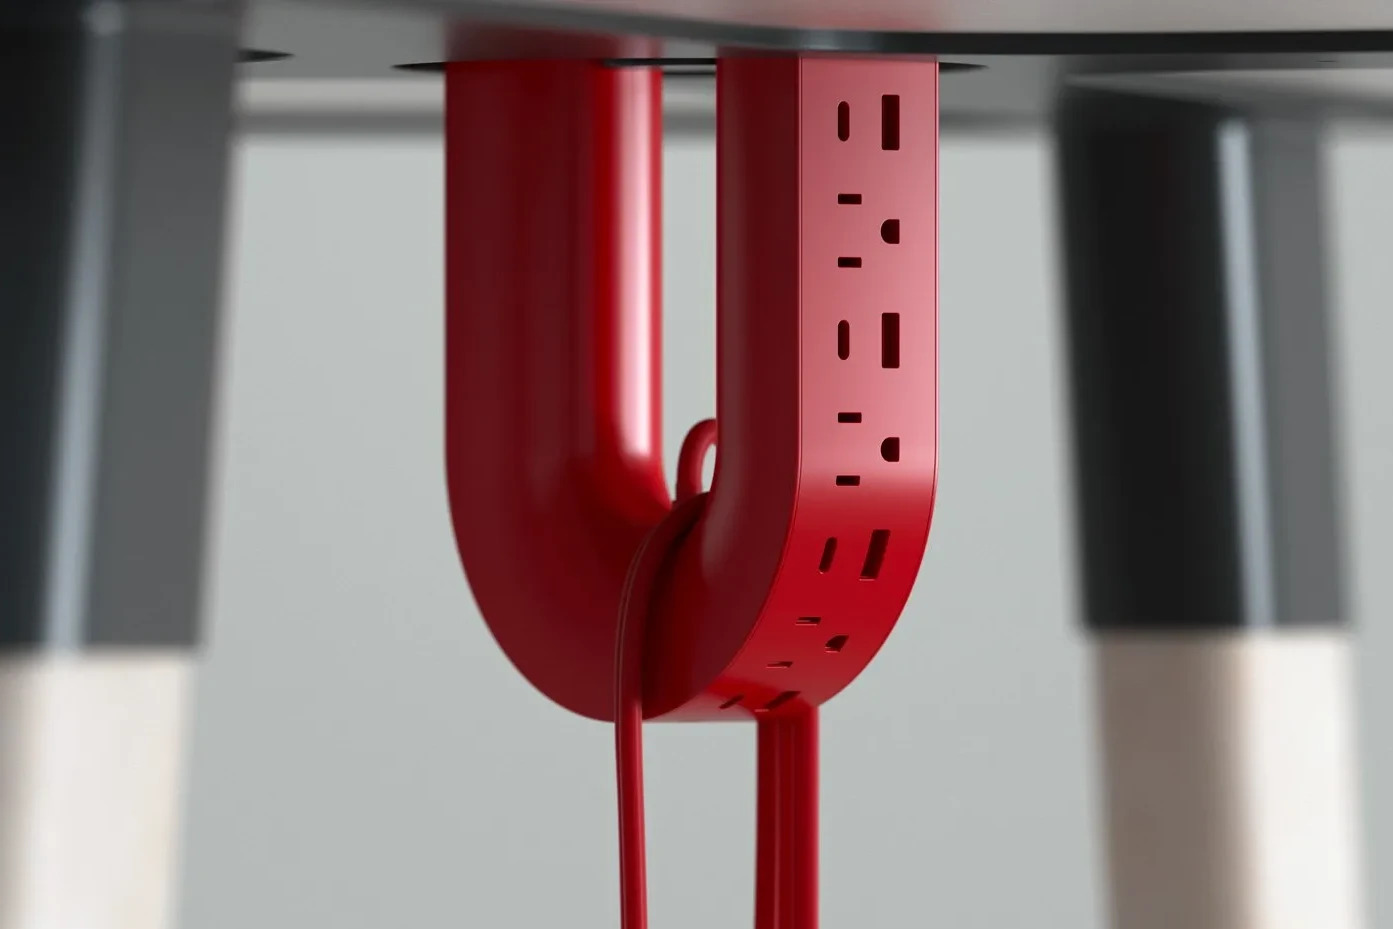 U-shaped power strip concept has an interesting cable management trick